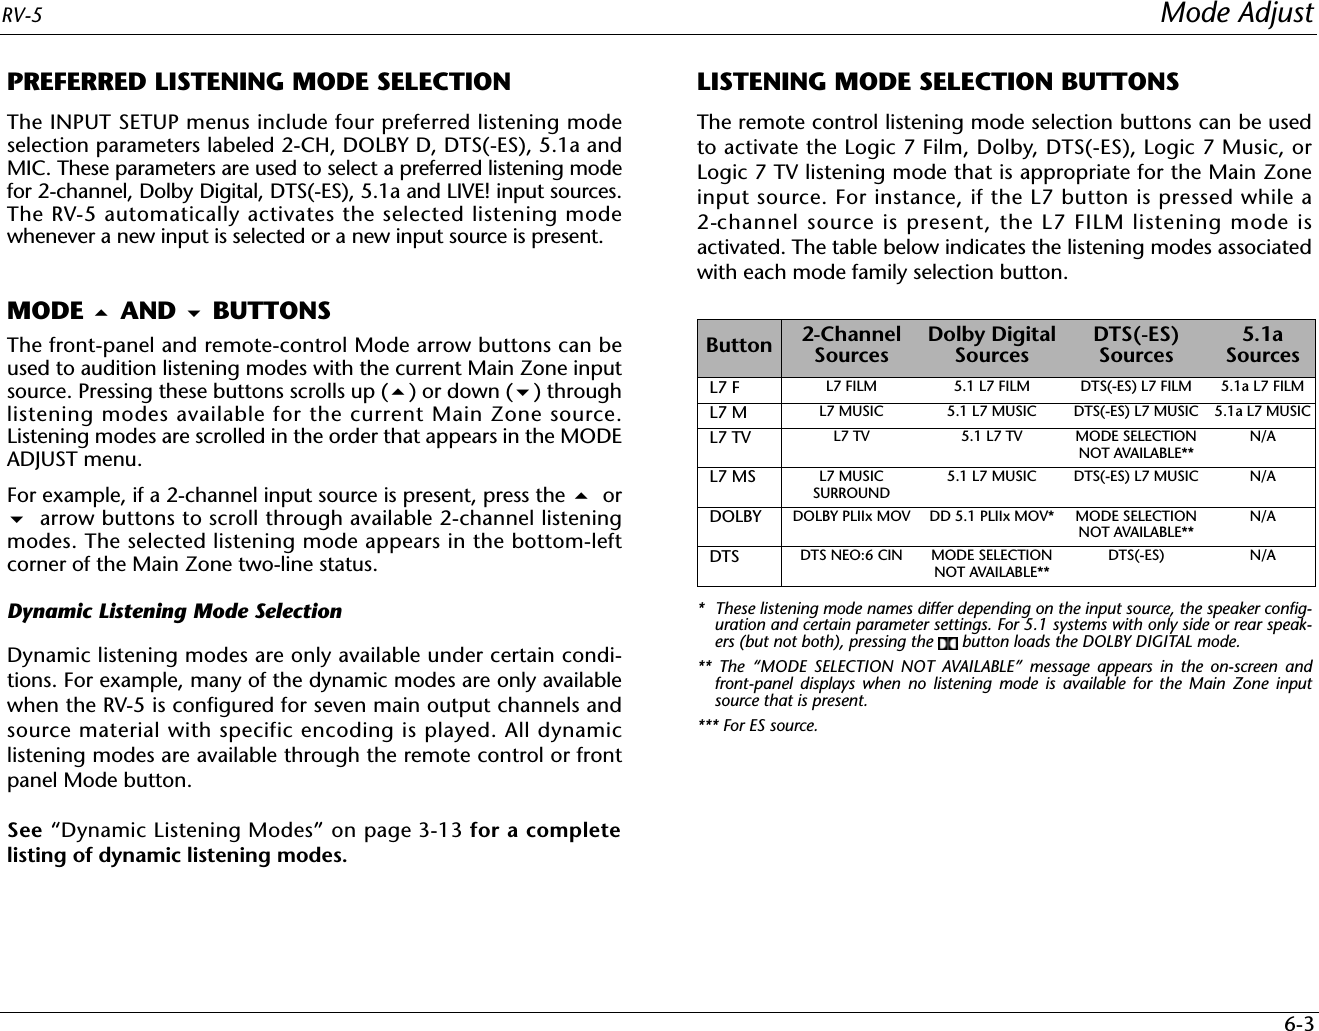 RV-5 Mode Adjust6-3PREFERRED LISTENING MODE SELECTION The INPUT SETUP menus include four preferred listening modeselection parameters labeled 2-CH, DOLBY D, DTS(-ES), 5.1a andMIC. These parameters are used to select a preferred listening modefor 2-channel, Dolby Digital, DTS(-ES), 5.1a and LIVE! input sources.The RV-5 automatically activates the selected listening modewhenever a new input is selected or a new input source is present.MODE  AND  BUTTONSThe front-panel and remote-control Mode arrow buttons can beused to audition listening modes with the current Main Zone inputsource. Pressing these buttons scrolls up () or down () throughlistening modes available for the current Main Zone source.Listening modes are scrolled in the order that appears in the MODEADJUST menu.For example, if a 2-channel input source is present, press the  or arrow buttons to scroll through available 2-channel listeningmodes. The selected listening mode appears in the bottom-leftcorner of the Main Zone two-line status.Dynamic Listening Mode SelectionDynamic listening modes are only available under certain condi-tions. For example, many of the dynamic modes are only availablewhen the RV-5 is configured for seven main output channels andsource material with specific encoding is played. All dynamiclistening modes are available through the remote control or frontpanel Mode button. See “Dynamic Listening Modes” on page 3-13 for a completelisting of dynamic listening modes.LISTENING MODE SELECTION BUTTONSThe remote control listening mode selection buttons can be usedto activate the Logic 7 Film, Dolby, DTS(-ES), Logic 7 Music, orLogic 7 TV listening mode that is appropriate for the Main Zoneinput source. For instance, if the L7 button is pressed while a2-channel source is present, the L7 FILM listening mode isactivated. The table below indicates the listening modes associatedwith each mode family selection button.*  These listening mode names differ depending on the input source, the speaker config-uration and certain parameter settings. For 5.1 systems with only side or rear speak-ers (but not both), pressing the   button loads the DOLBY DIGITAL mode.** The “MODE SELECTION NOT AVAILABLE” message appears in the on-screen andfront-panel displays when no listening mode is available for the Main Zone inputsource that is present.*** For ES source.Button 2-Channel SourcesDolby DigitalSourcesDTS(-ES) Sources5.1aSourcesL7 F L7 FILM 5.1 L7 FILM DTS(-ES) L7 FILM 5.1a L7 FILML7 M L7 MUSIC 5.1 L7 MUSIC DTS(-ES) L7 MUSIC 5.1a L7 MUSICL7 TV L7 TV 5.1 L7 TV MODE SELECTION NOT AVAILABLE**N/AL7 MS L7 MUSIC SURROUND5.1 L7 MUSIC DTS(-ES) L7 MUSIC N/ADOLBY DOLBY PLIIx MOV DD 5.1 PLIIx MOV* MODE SELECTION NOT AVAILABLE**N/ADTS DTS NEO:6 CIN MODE SELECTION NOT AVAILABLE**DTS(-ES) N/A